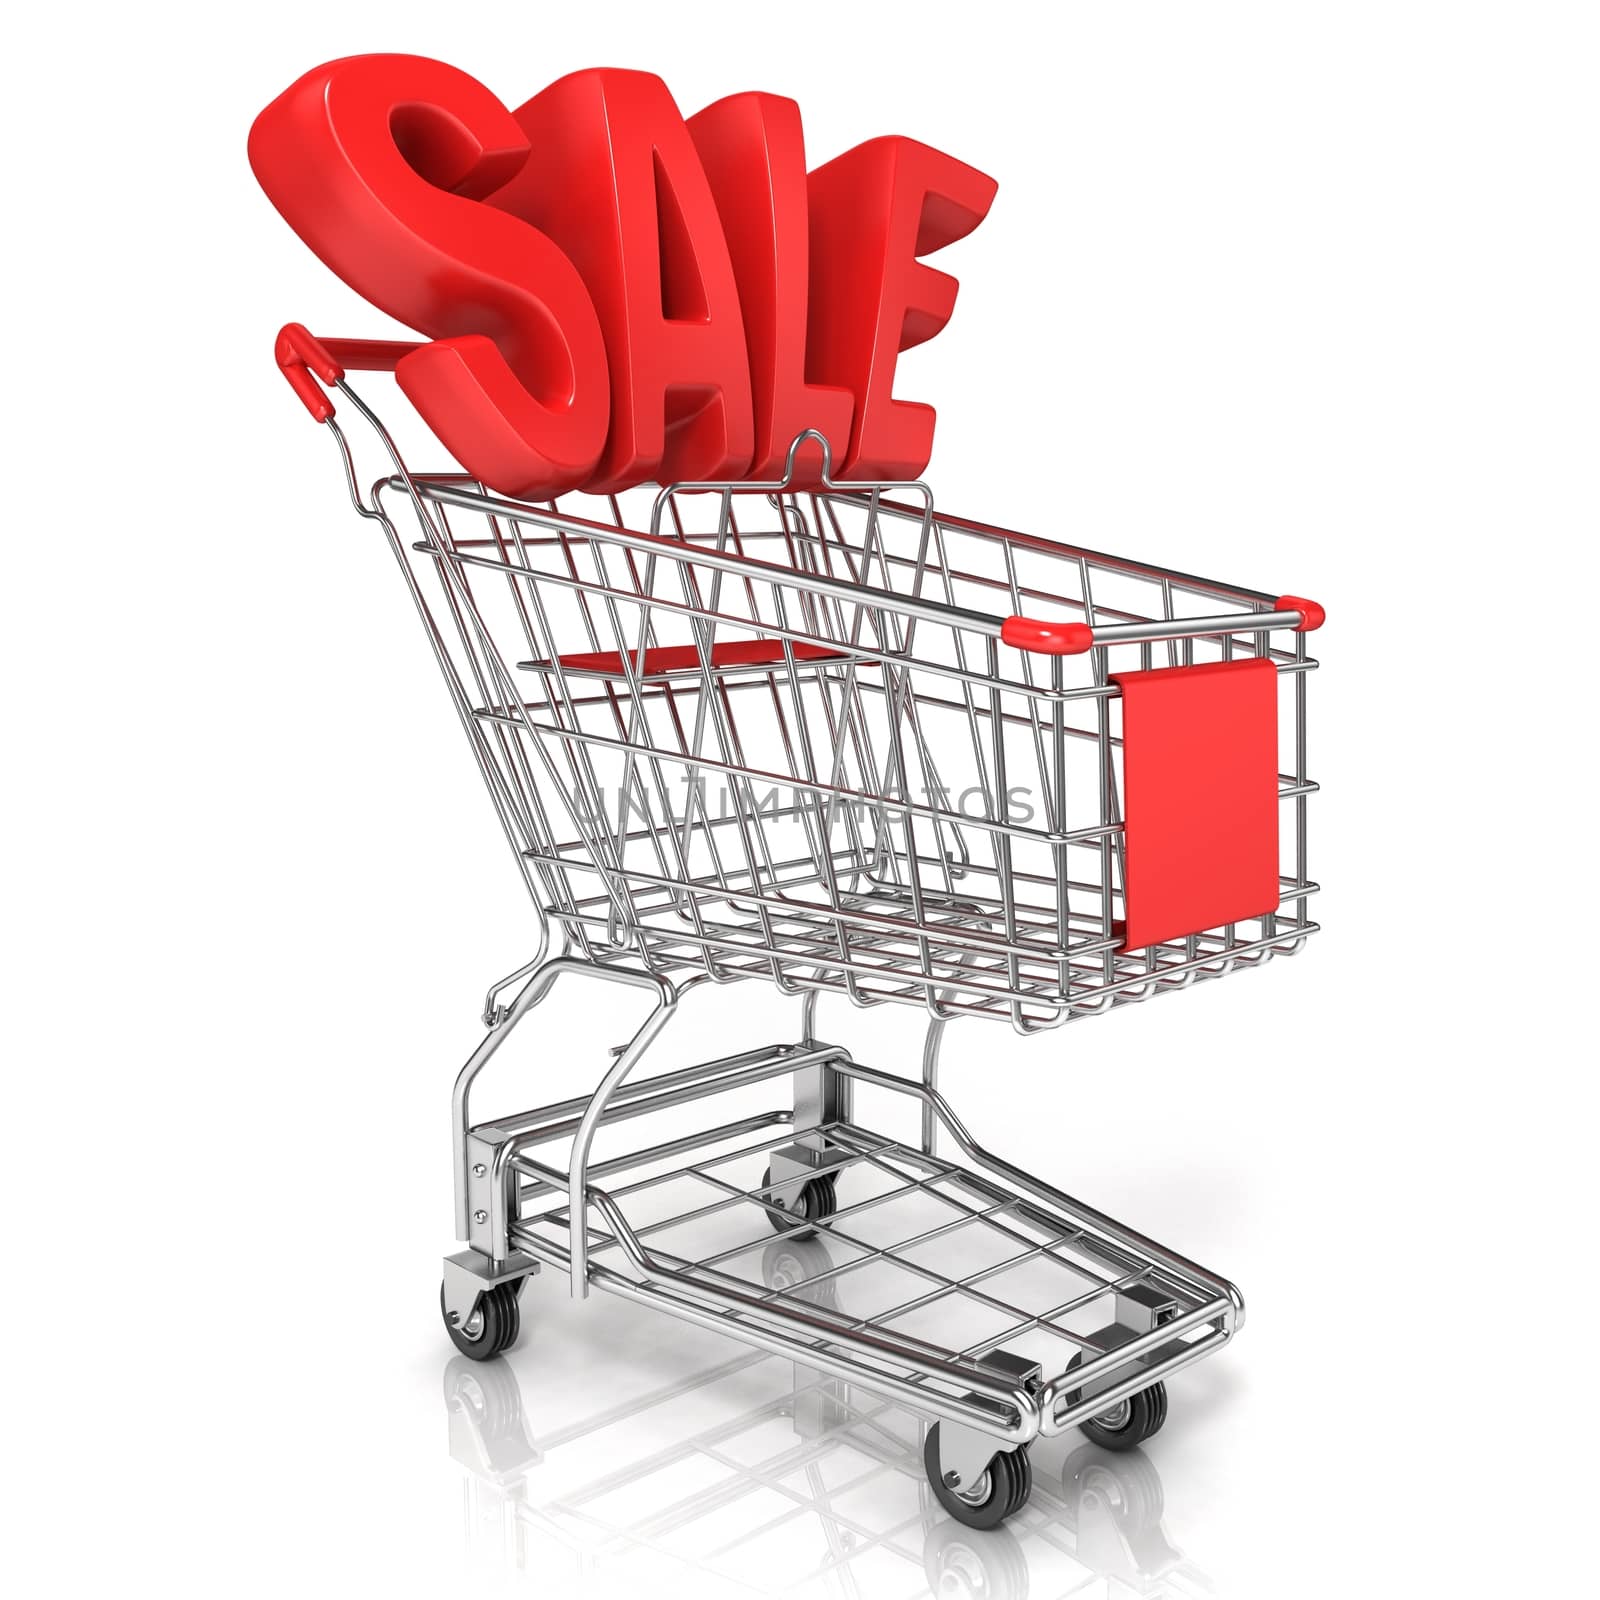 Red shopping cart with sale sign by djmilic